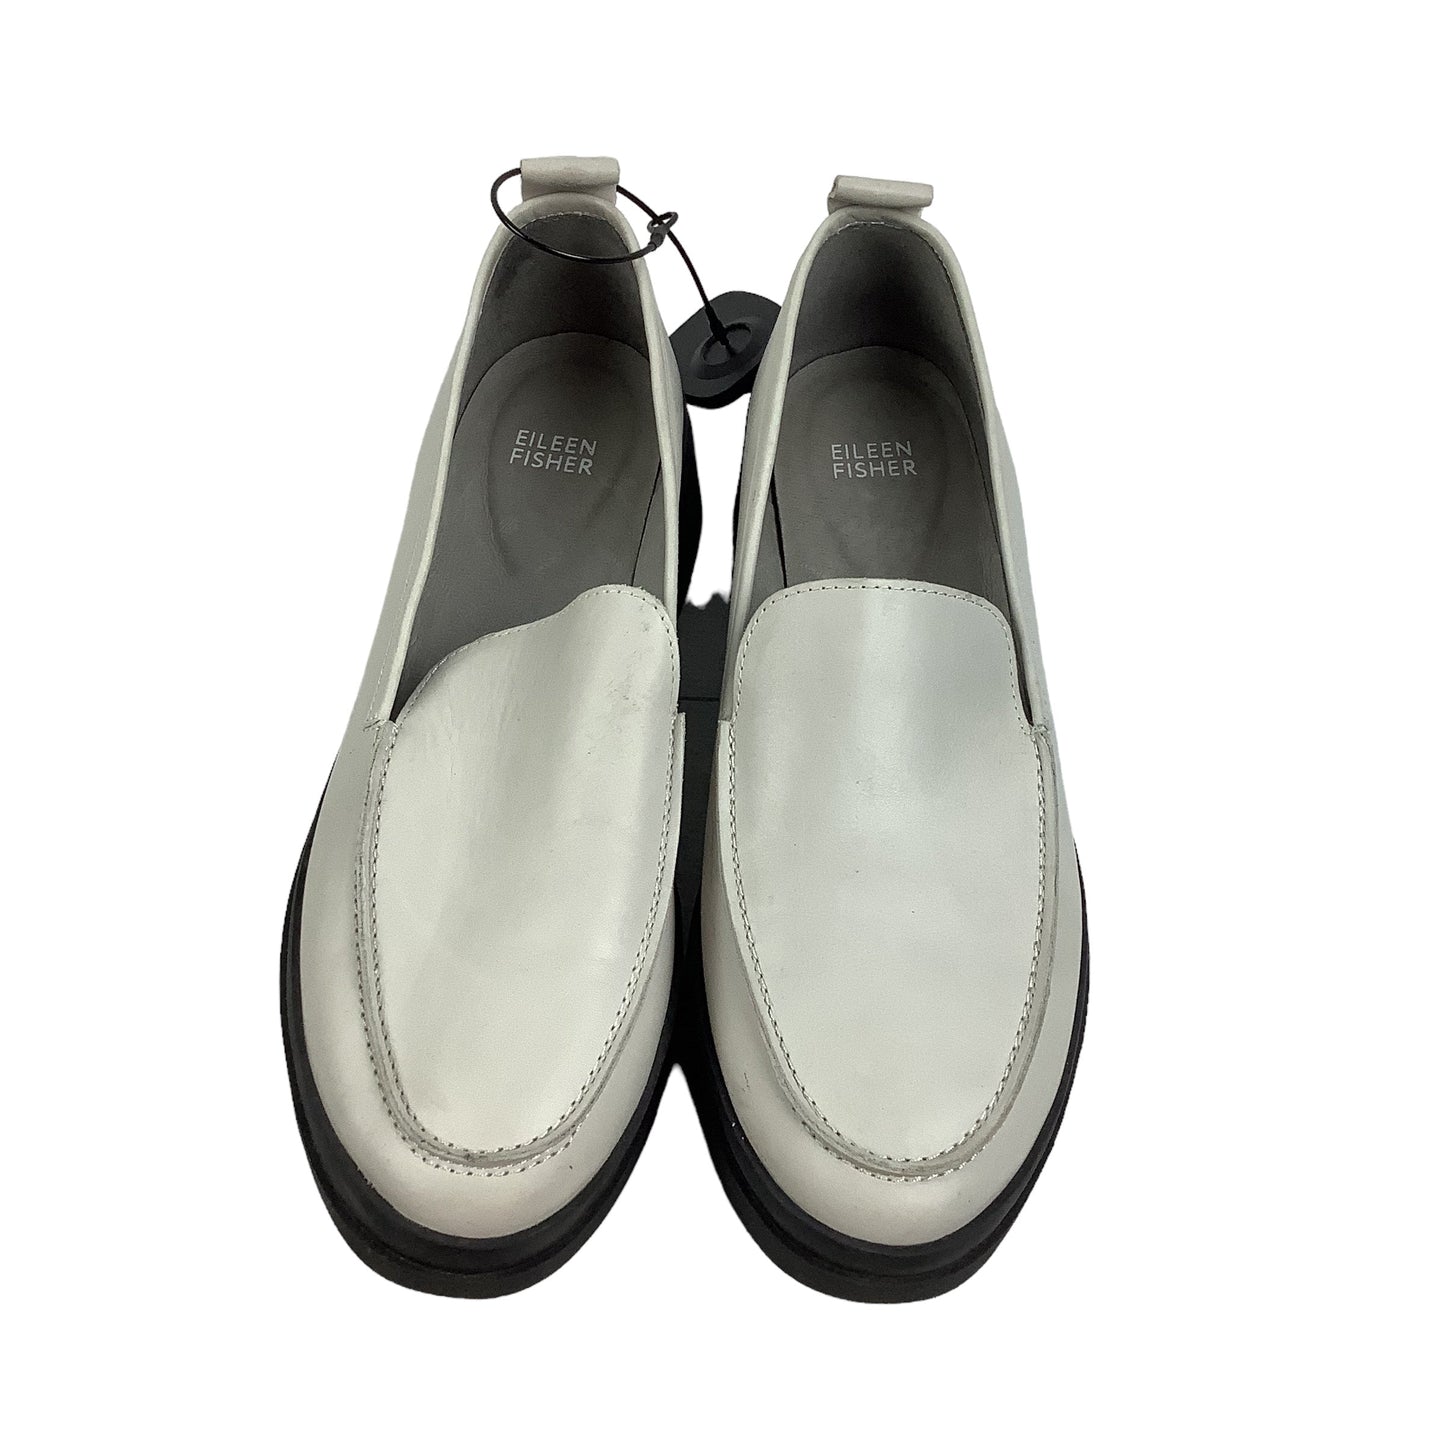 Grey Shoes Flats Eileen Fisher, Size 10